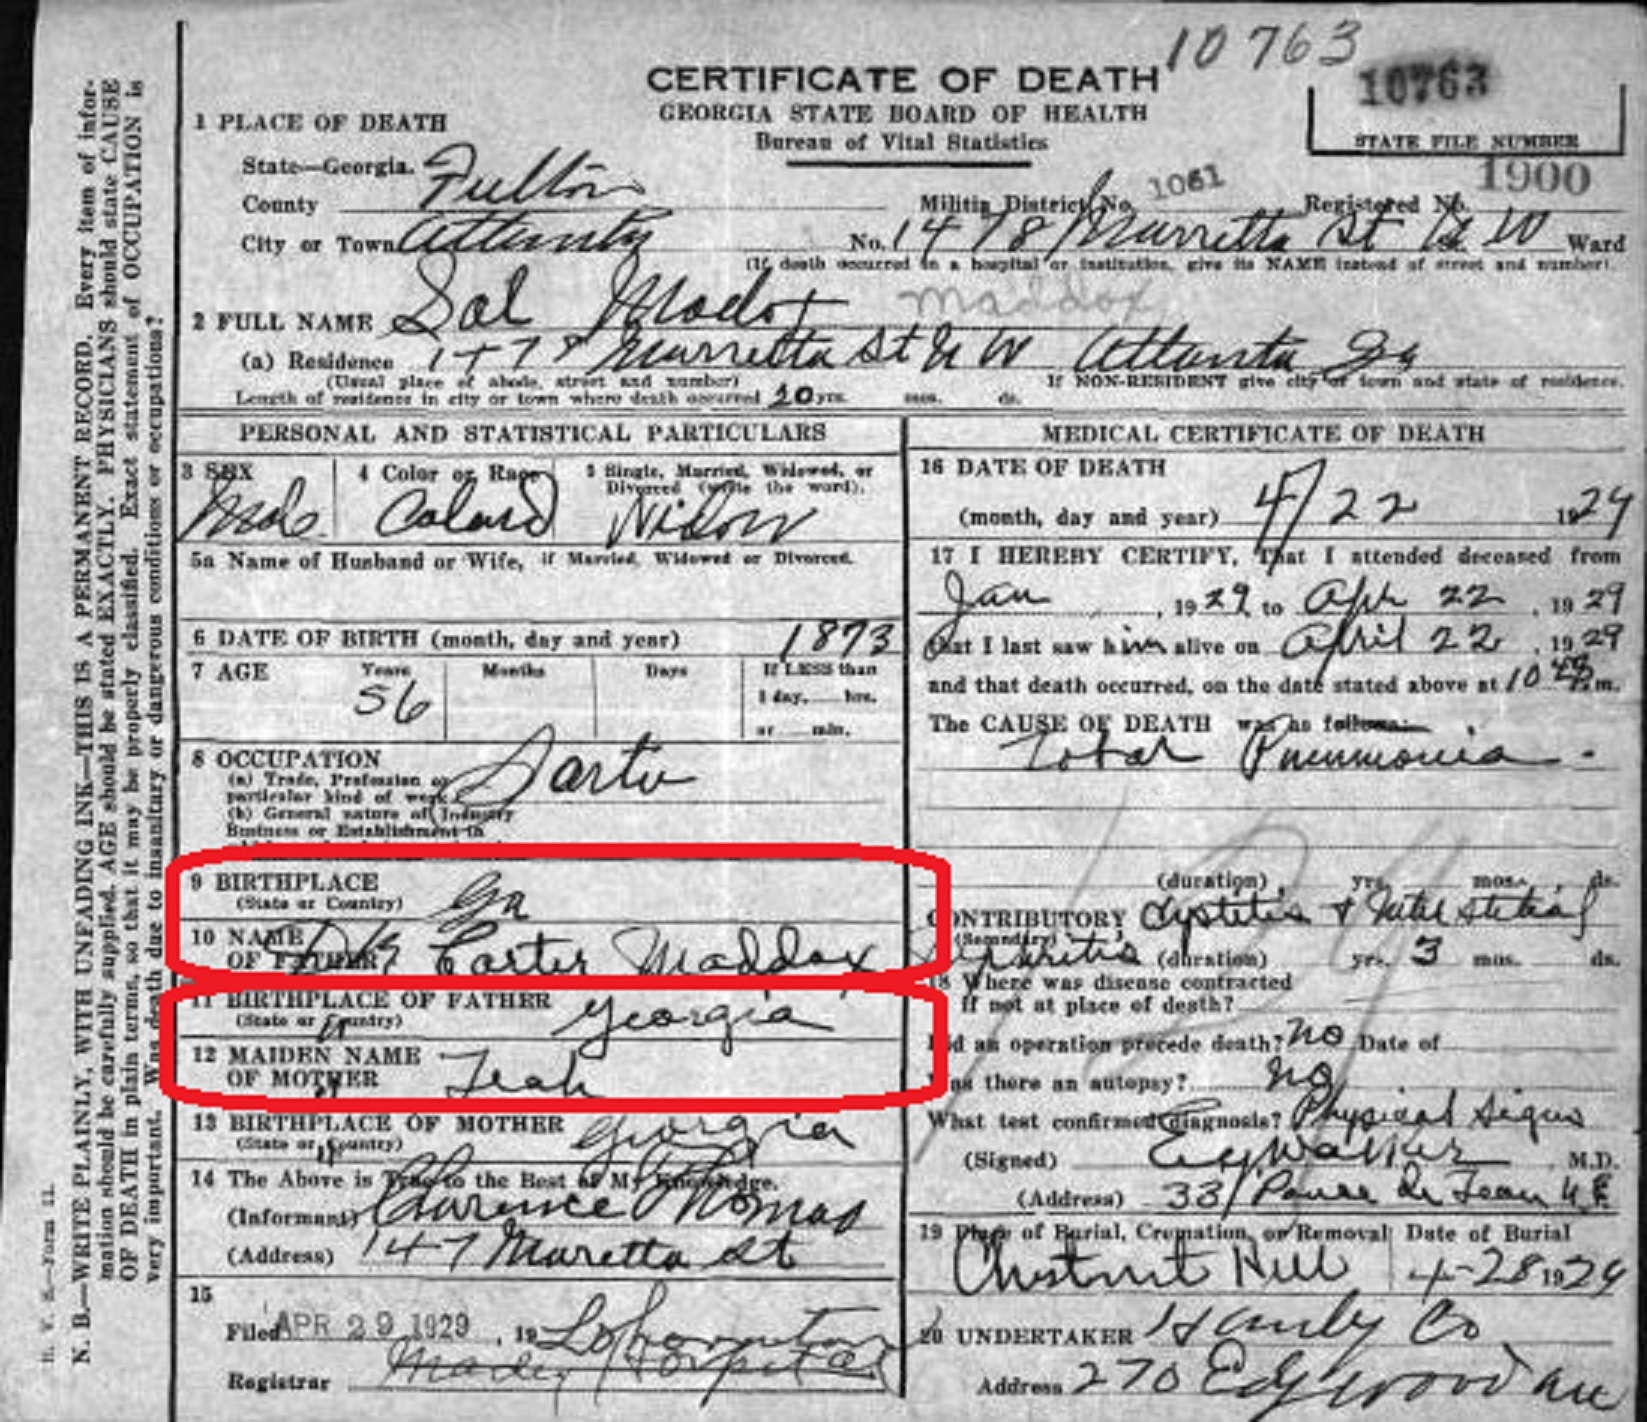 solomon maddox full death certificate (with Carter circled)